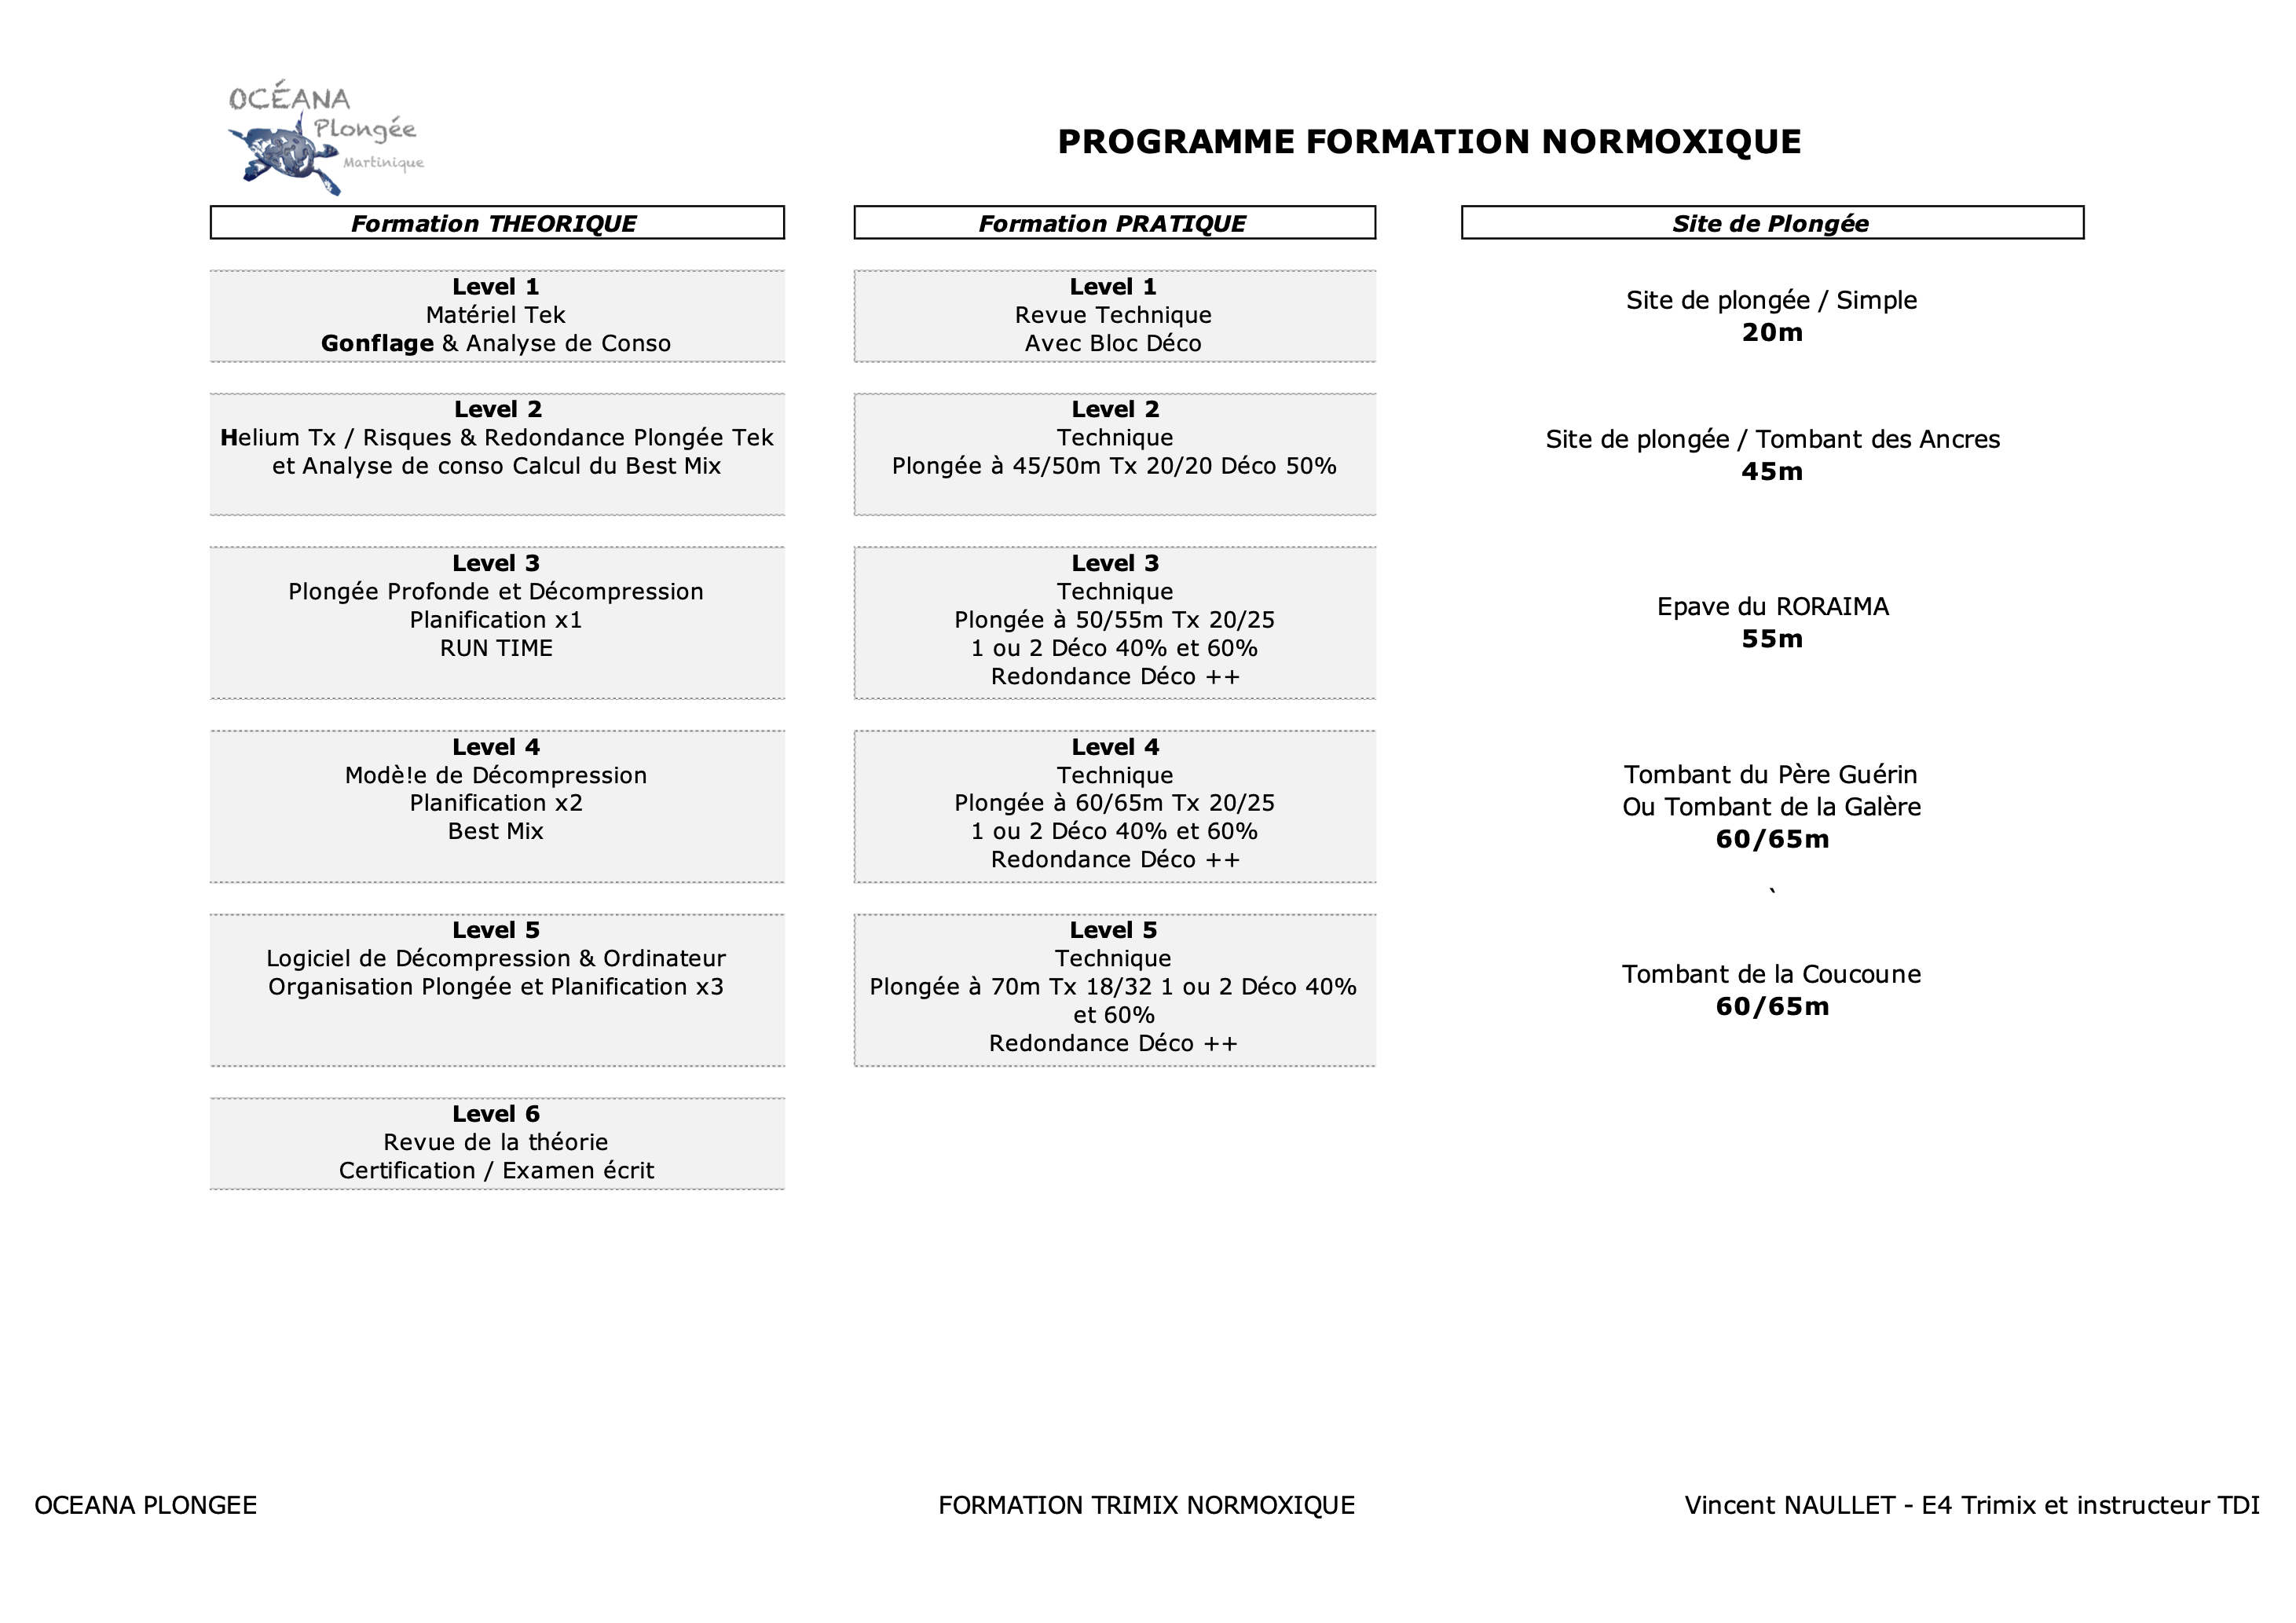 Programme Formation Tx normo Type copie